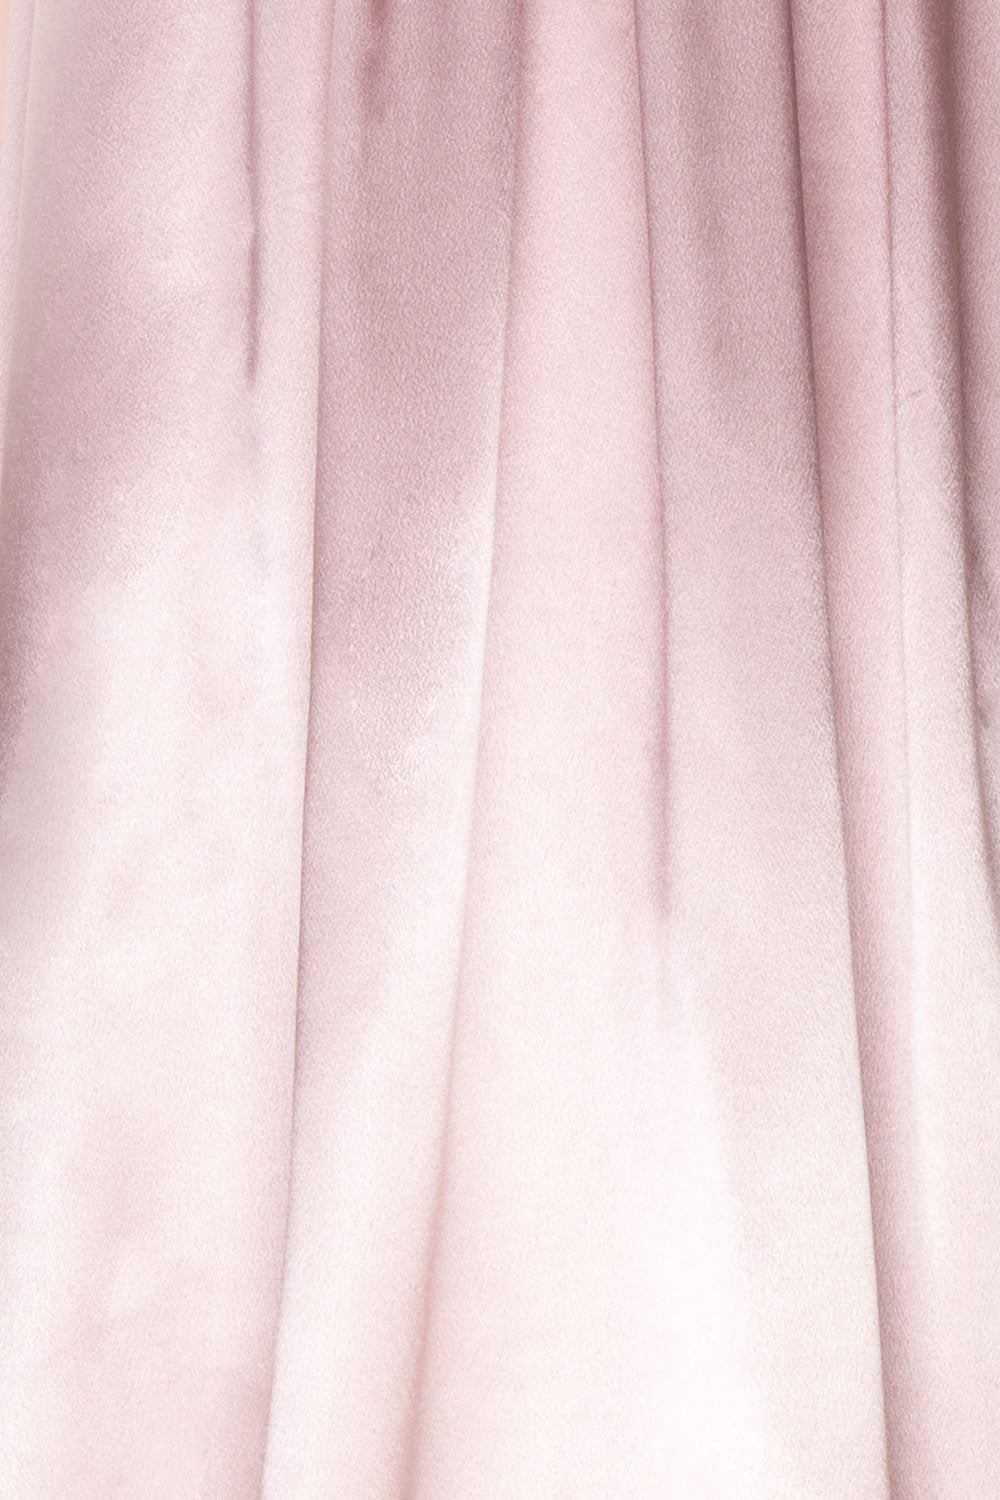 Mayla Blush | Pink Silky Gown